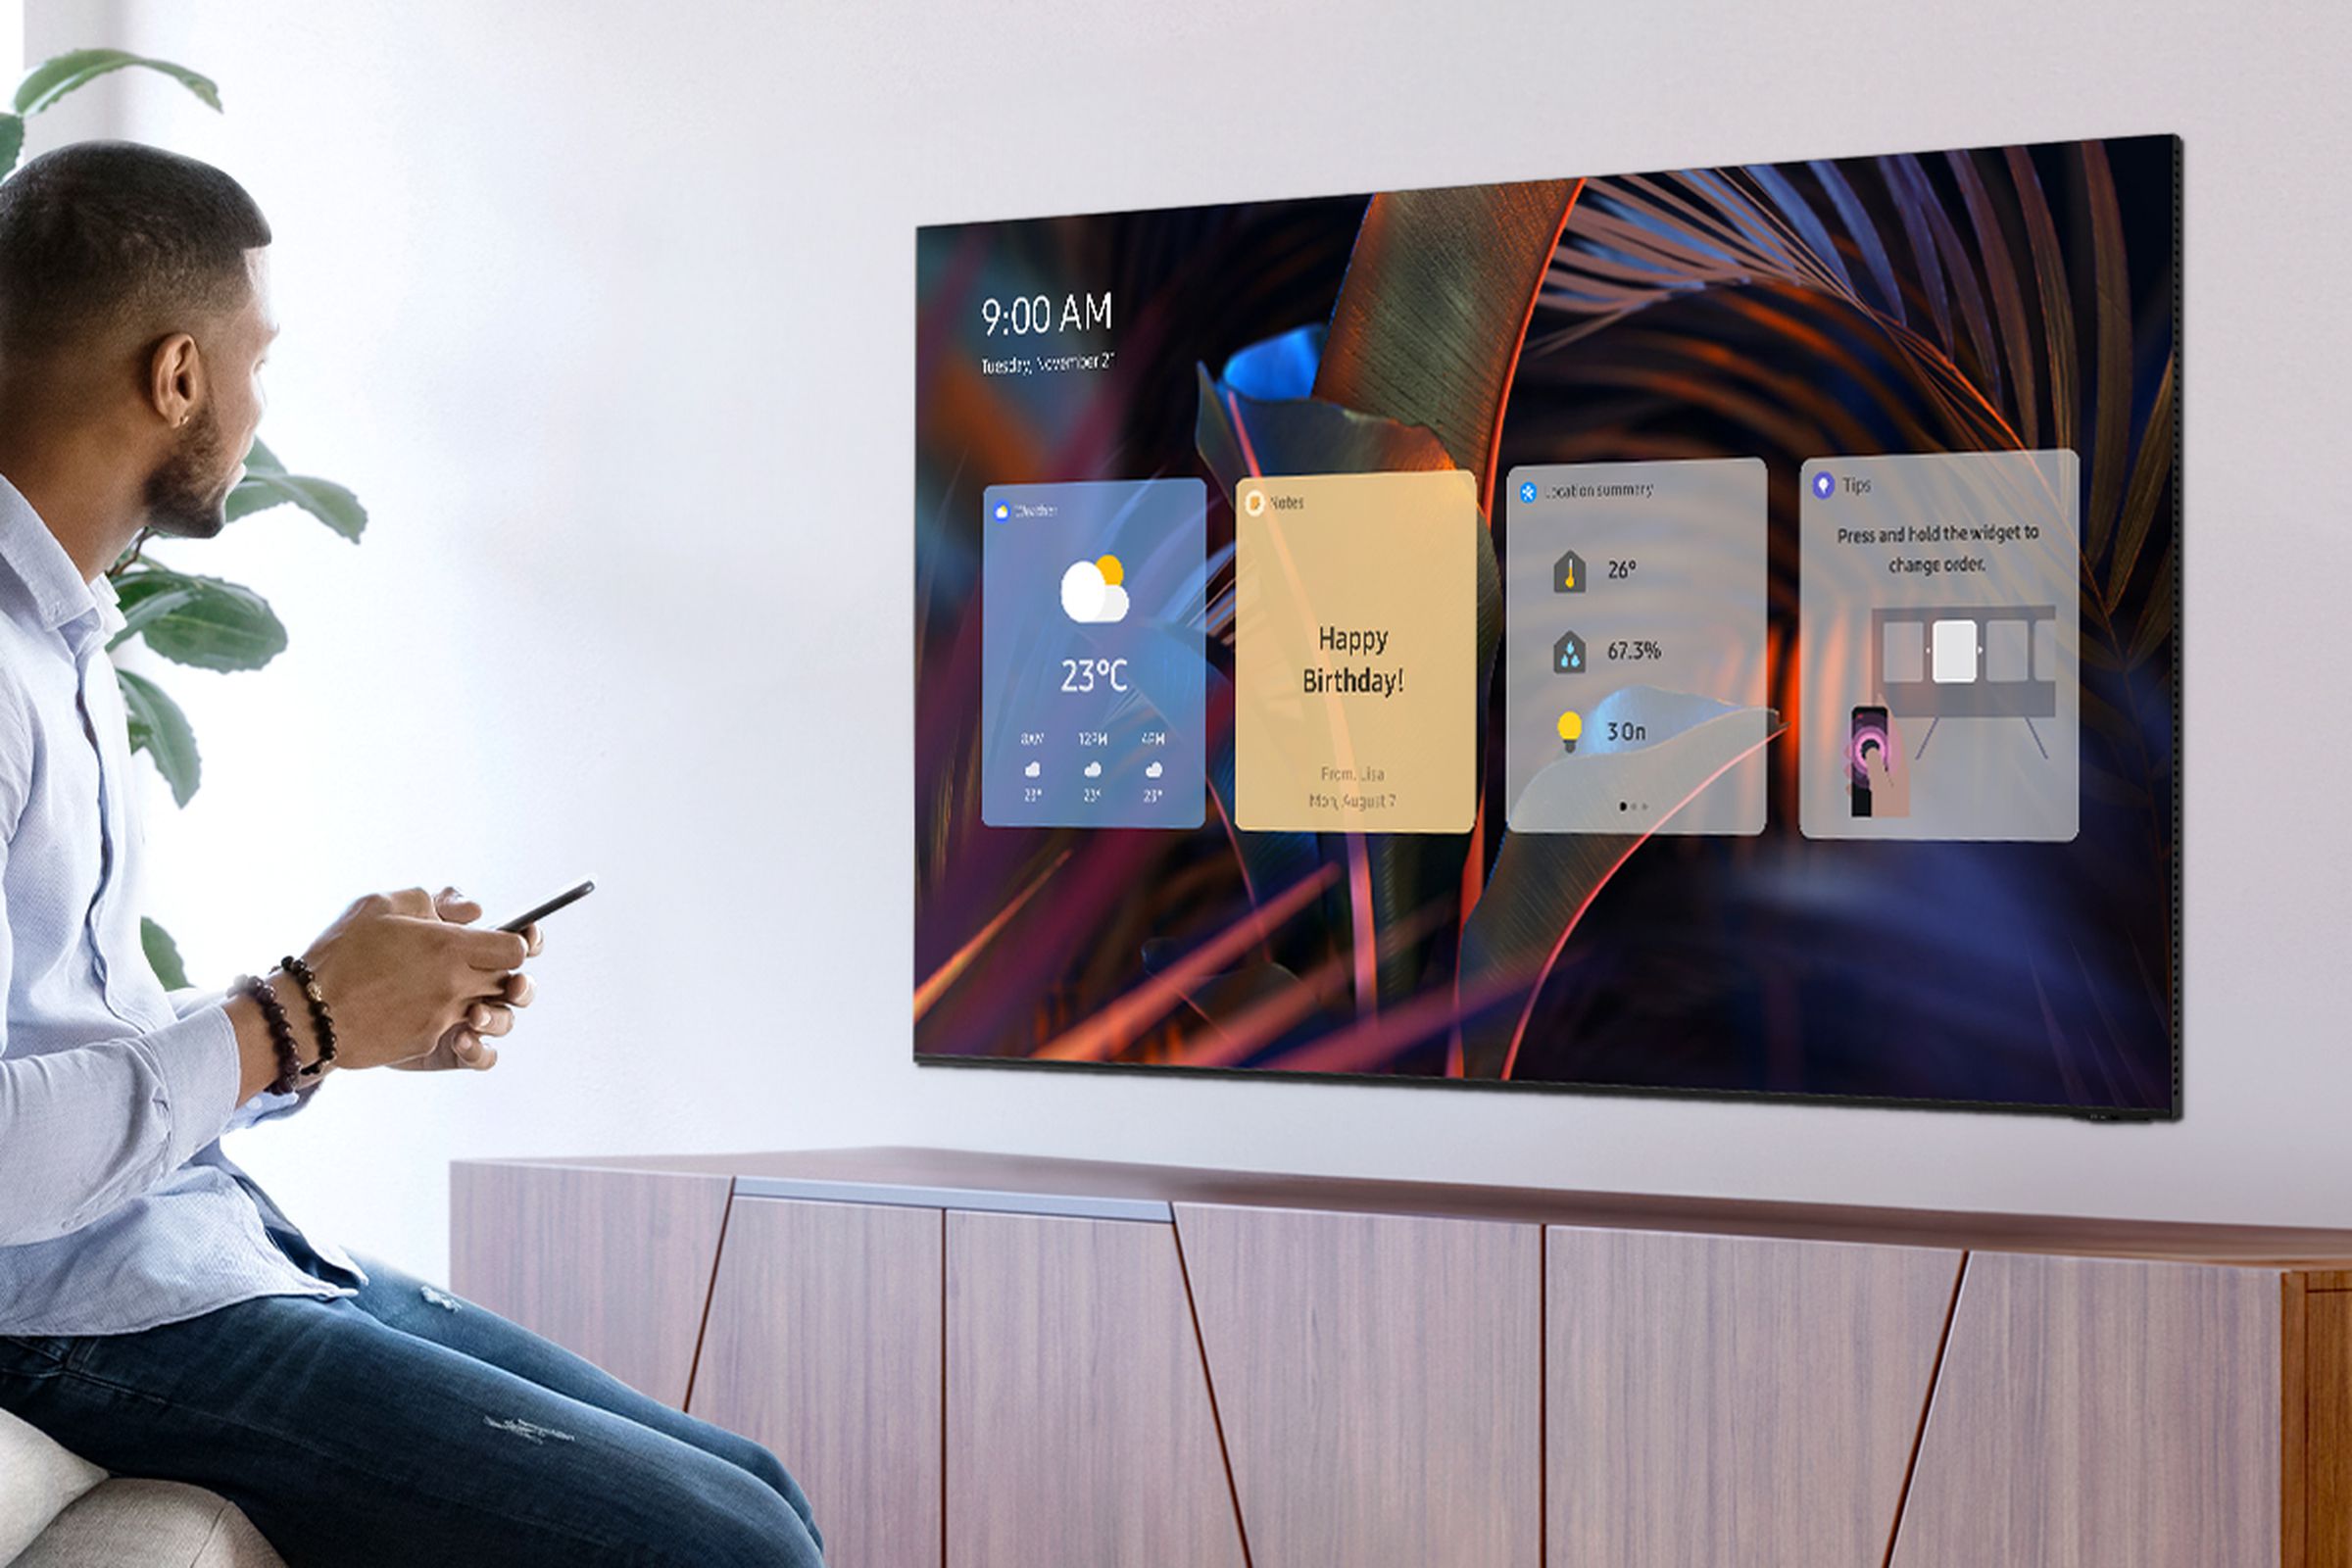 Samsung TVs are becoming more like smart displays with new features launching at CES this week.